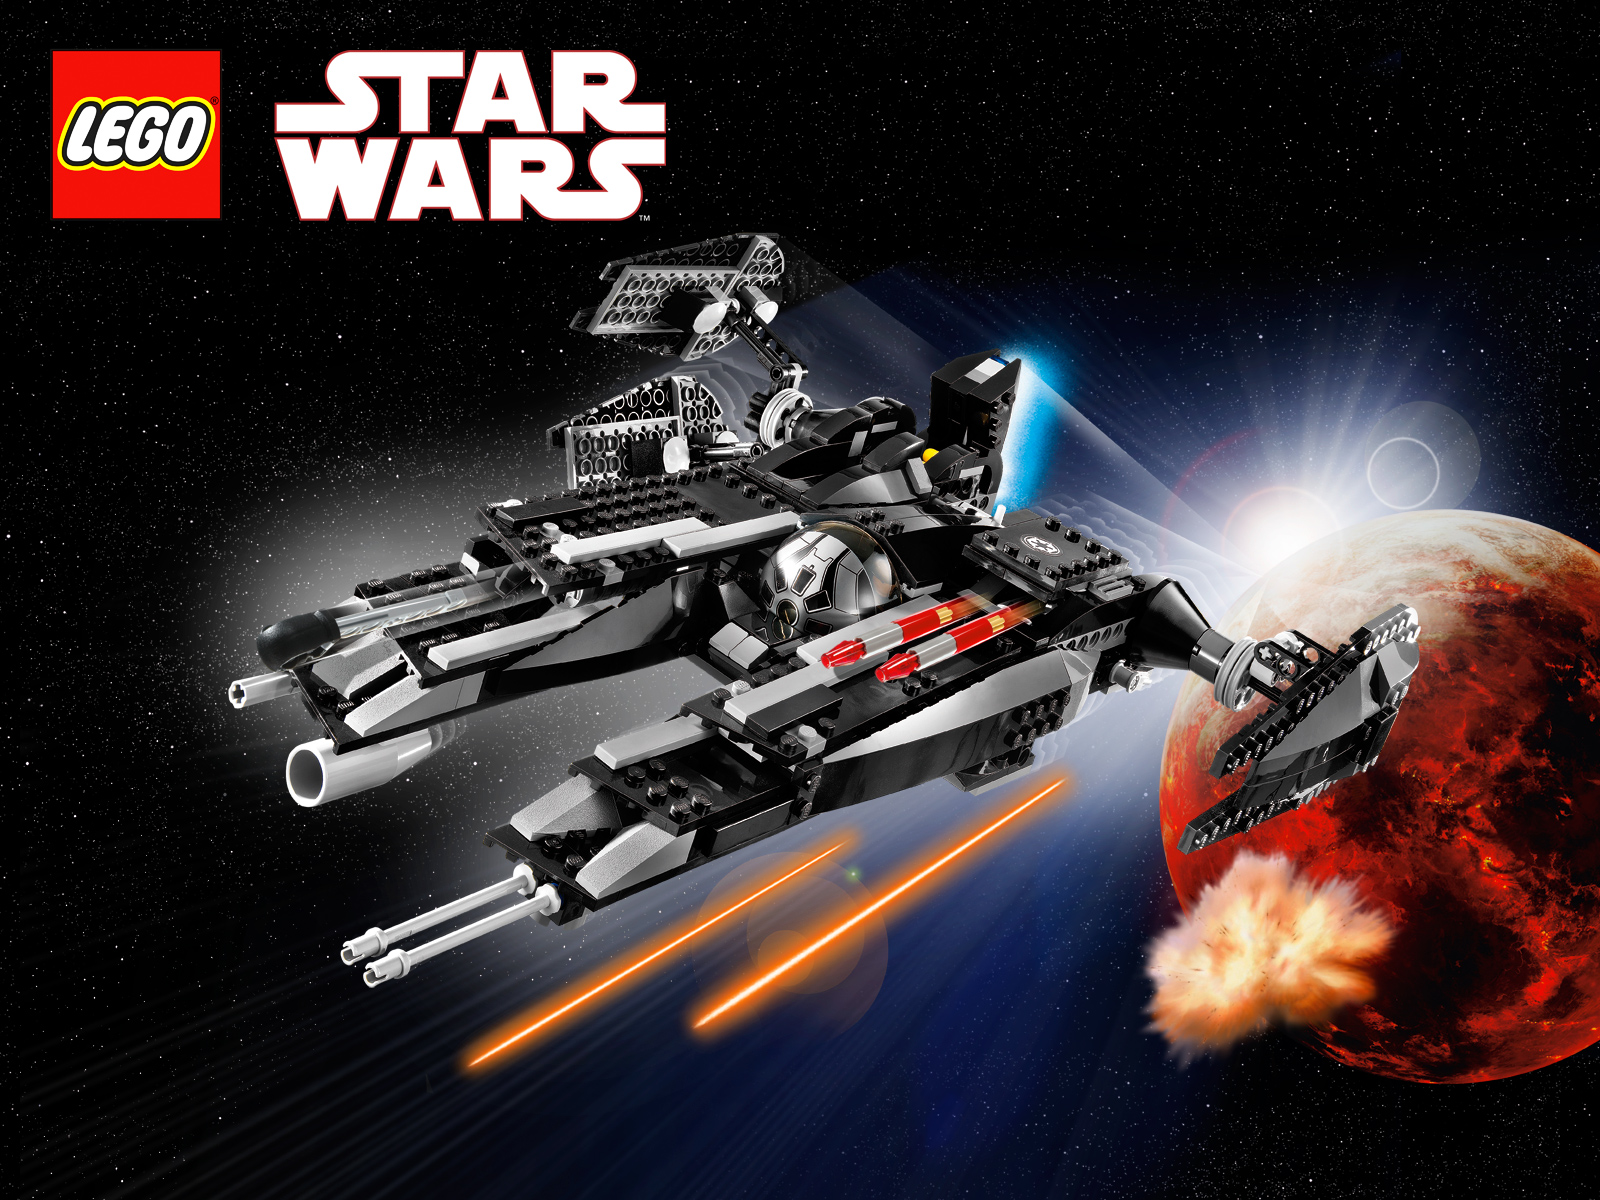 Lego Star Wars images Lego Star Wars HD wallpaper and background